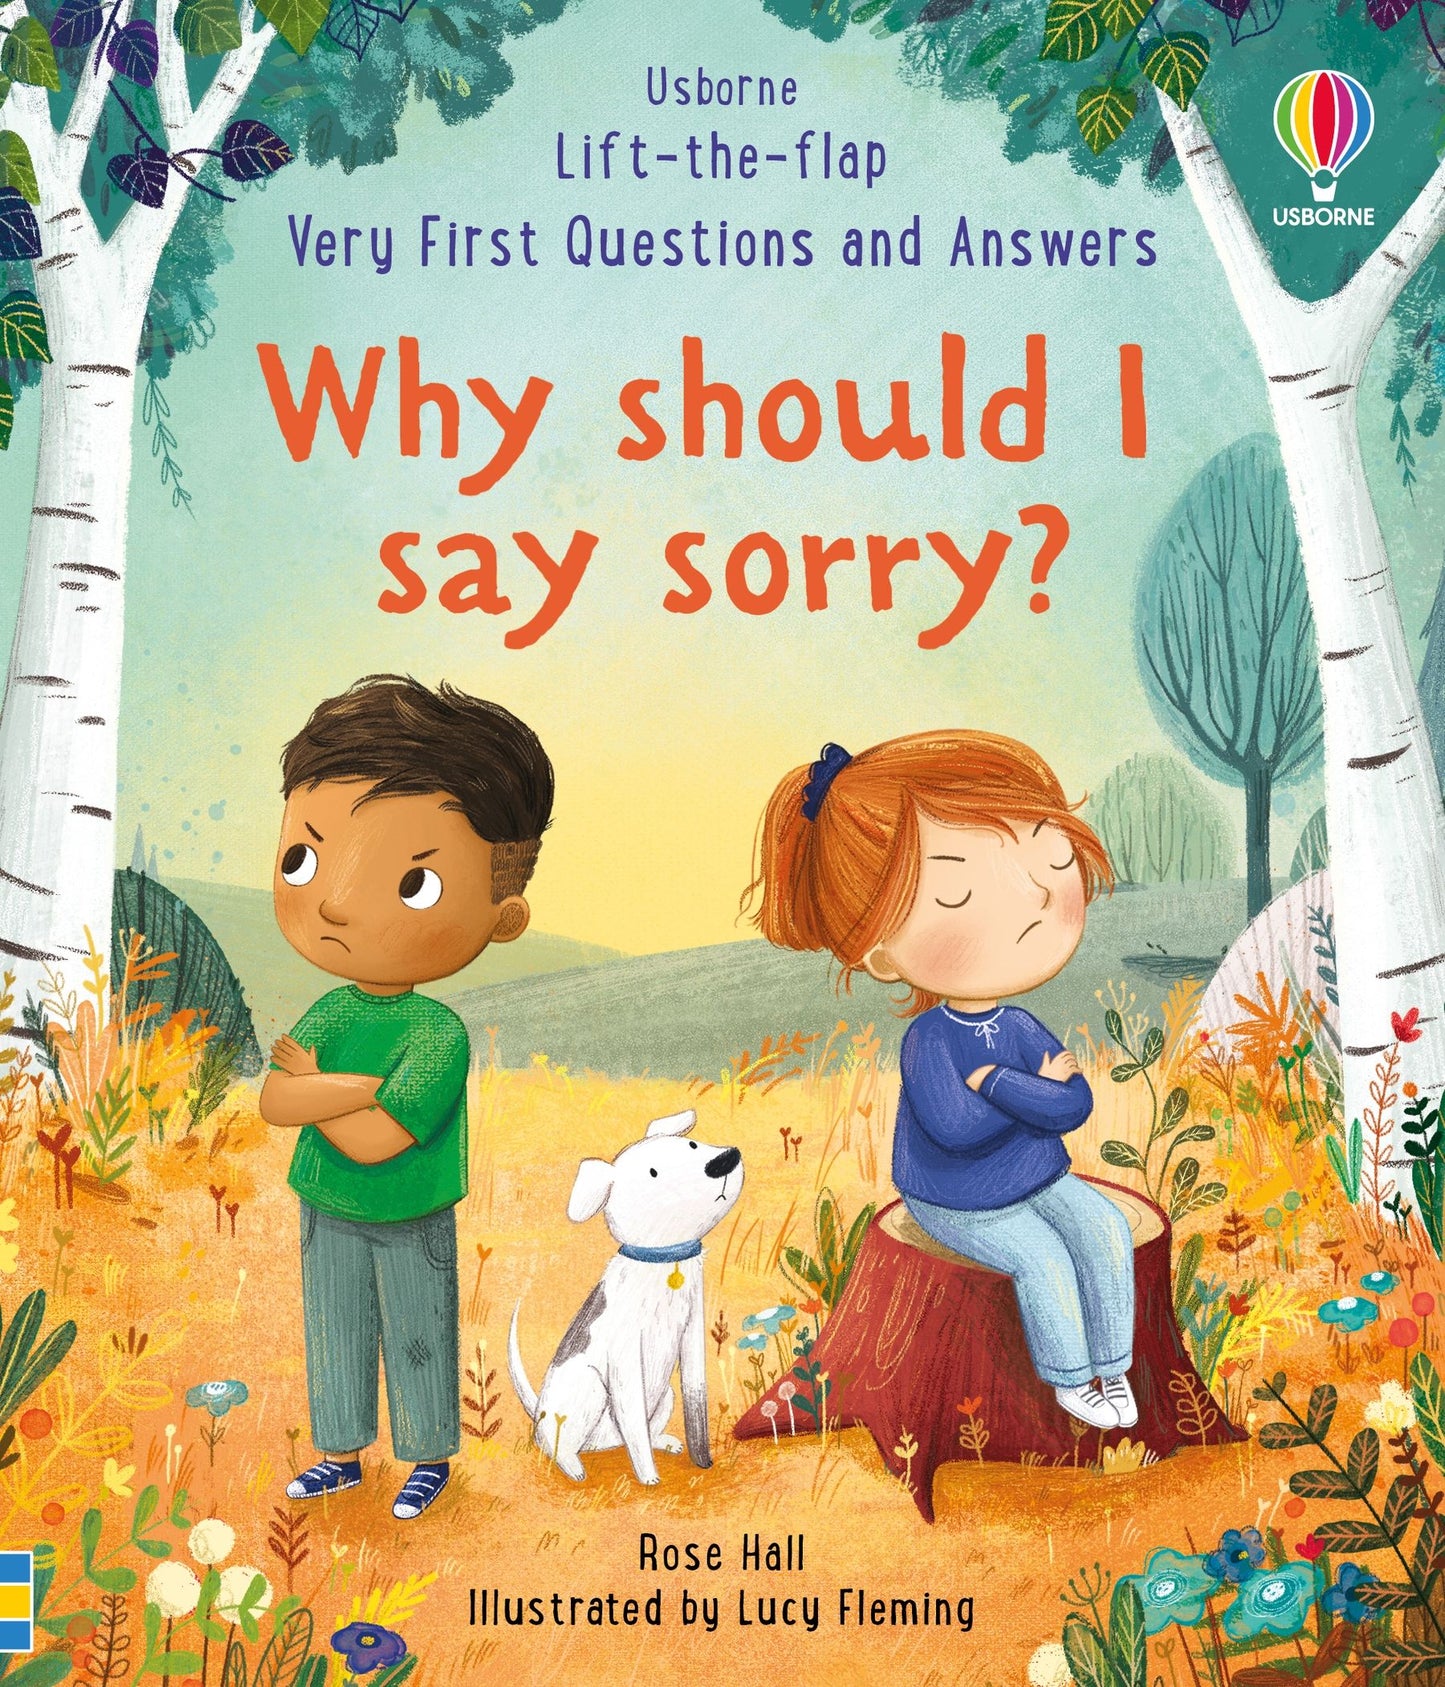 Very First Questions & Answers: Why should I say sorry? 我為什麼要說對不起？